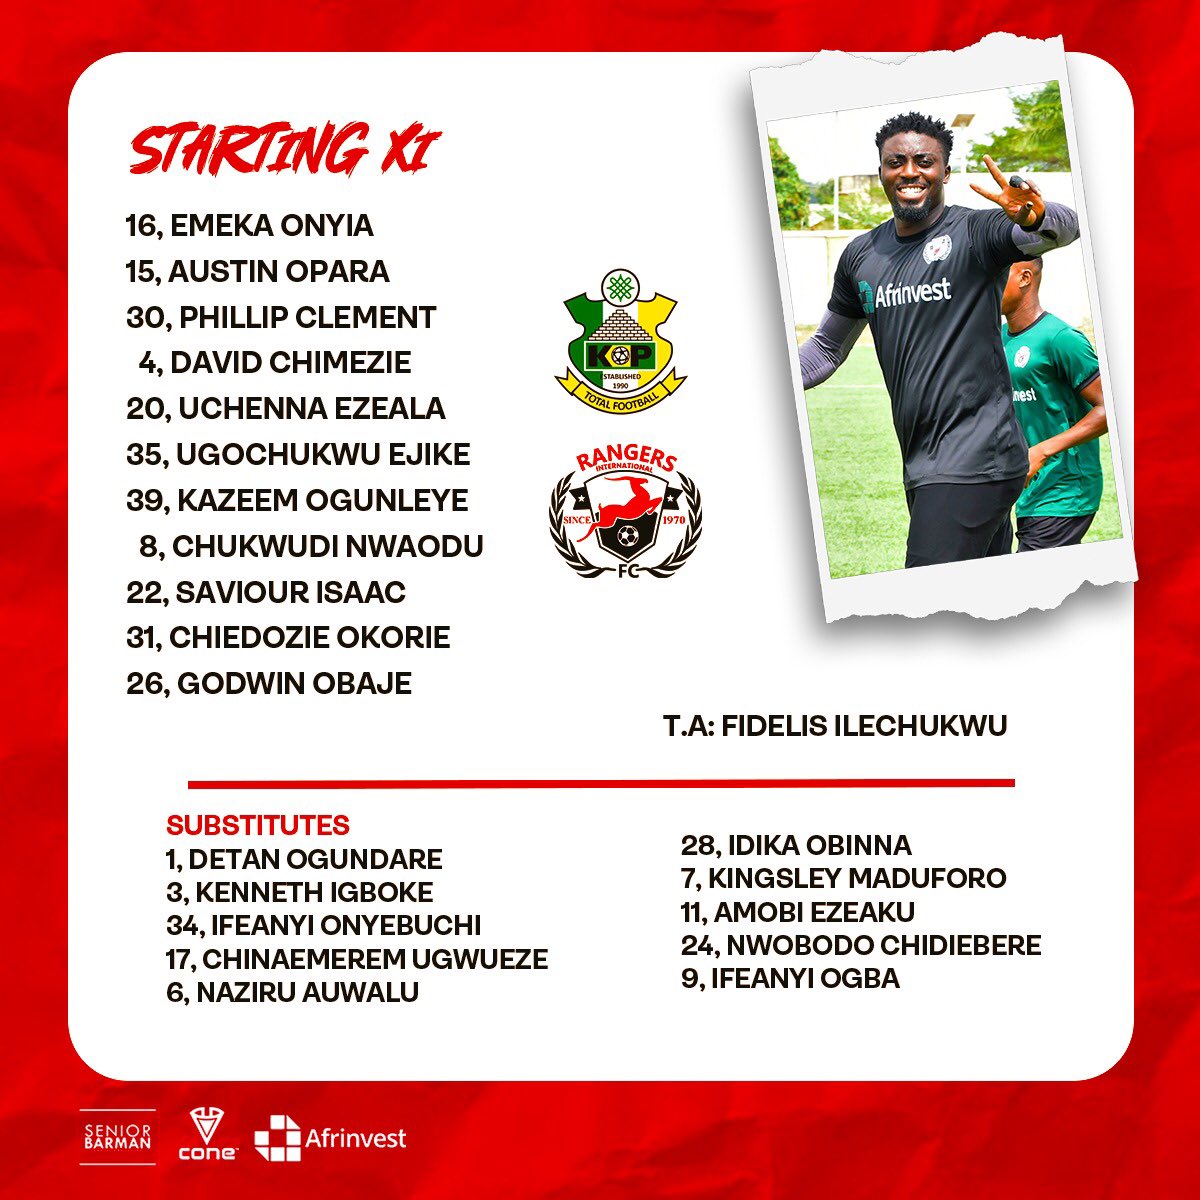 Our team to face Kano Pillars FC 🔴⚪

#HistoryTogether #NeverSayDie